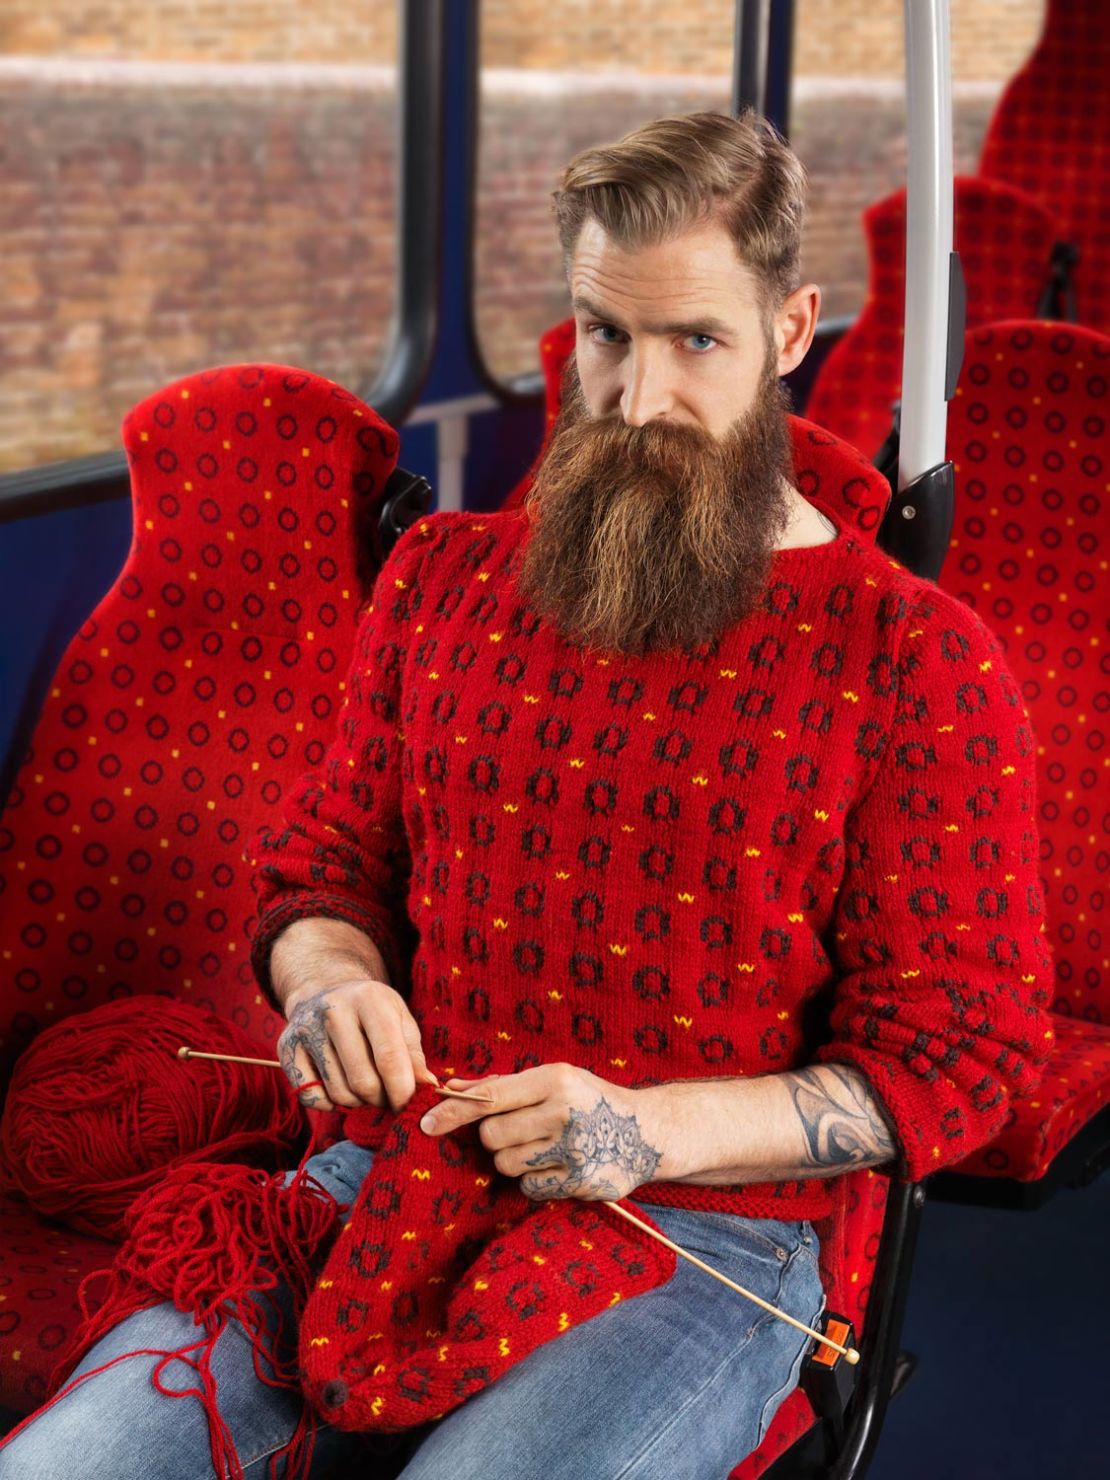 A model wears a red sweater to match bus seats.